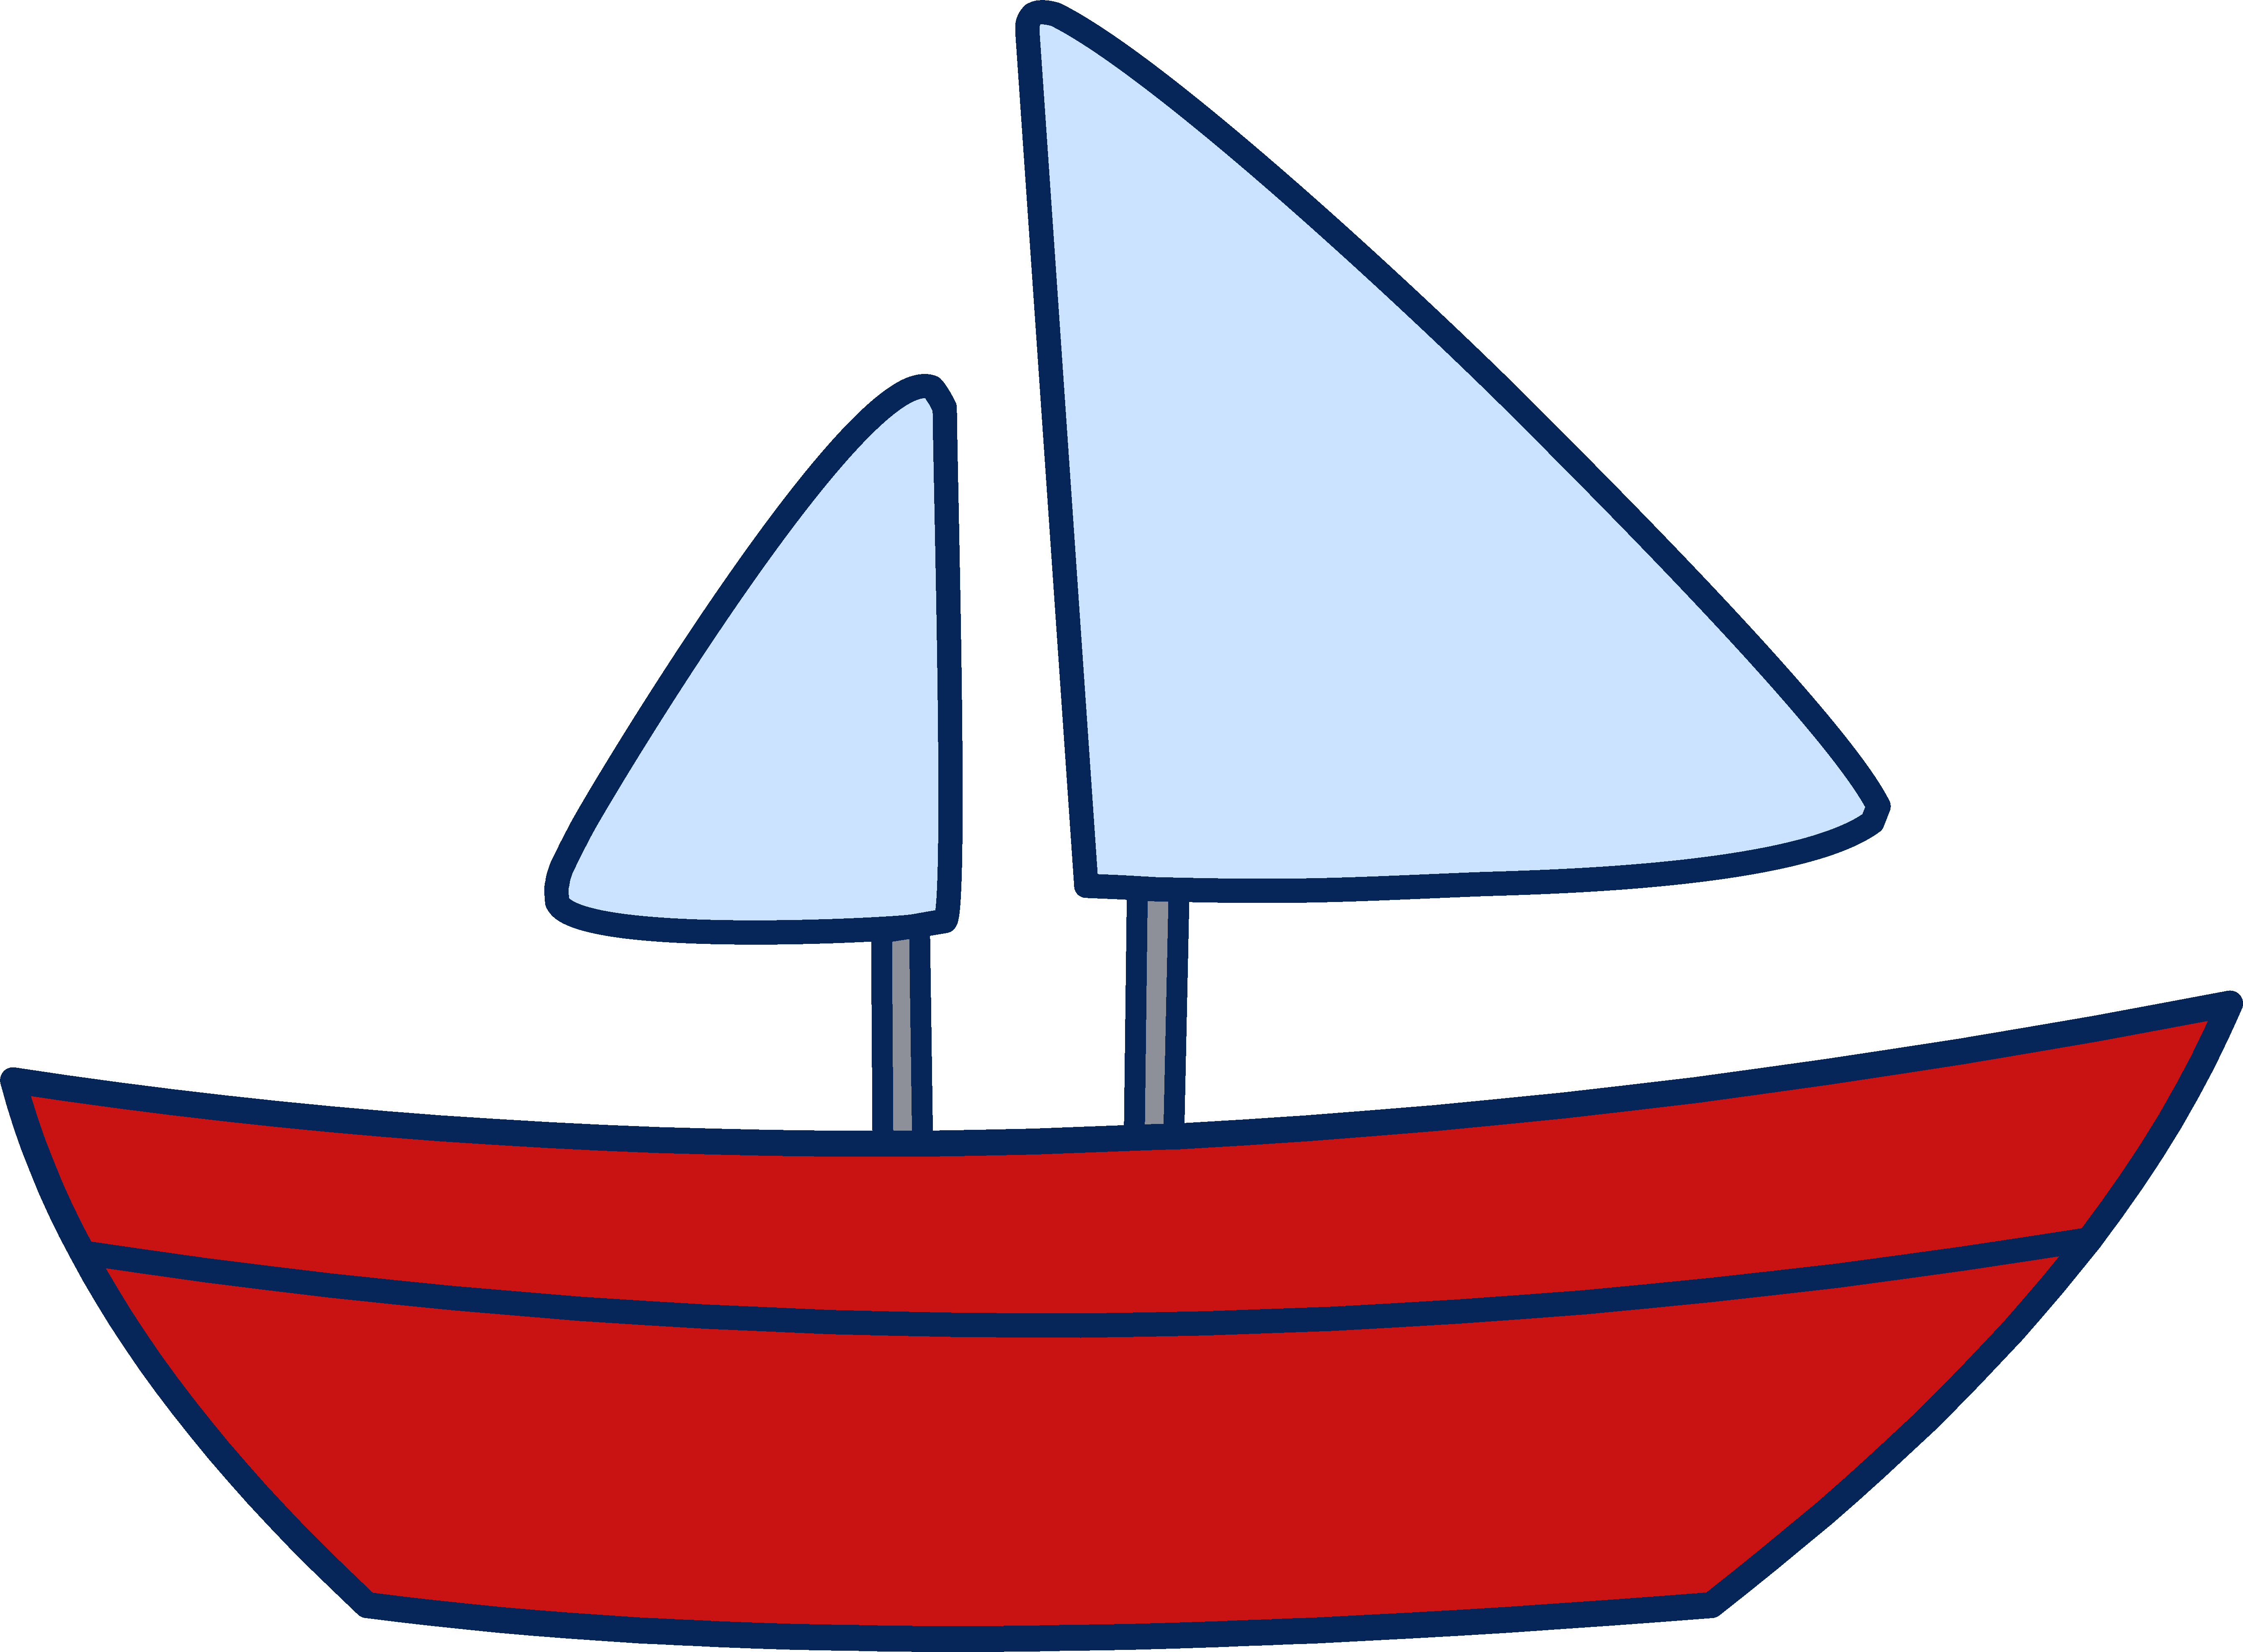 Simple Sailboat Clipart | Clipart Panda - Free Clipart Images